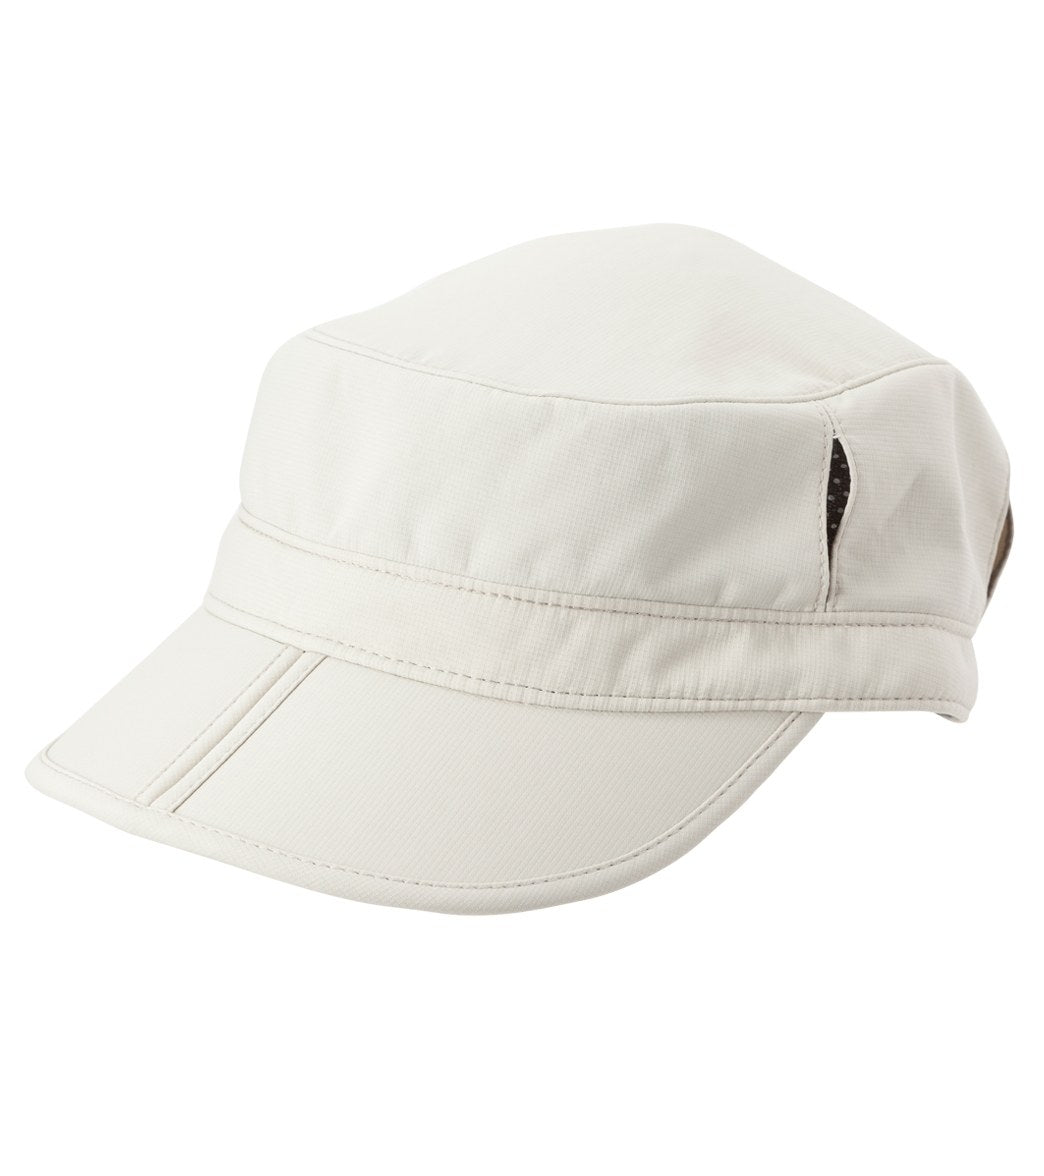 Sunday Afternoons Sun Tripper Cap (Unisex) at SwimOutlet.com